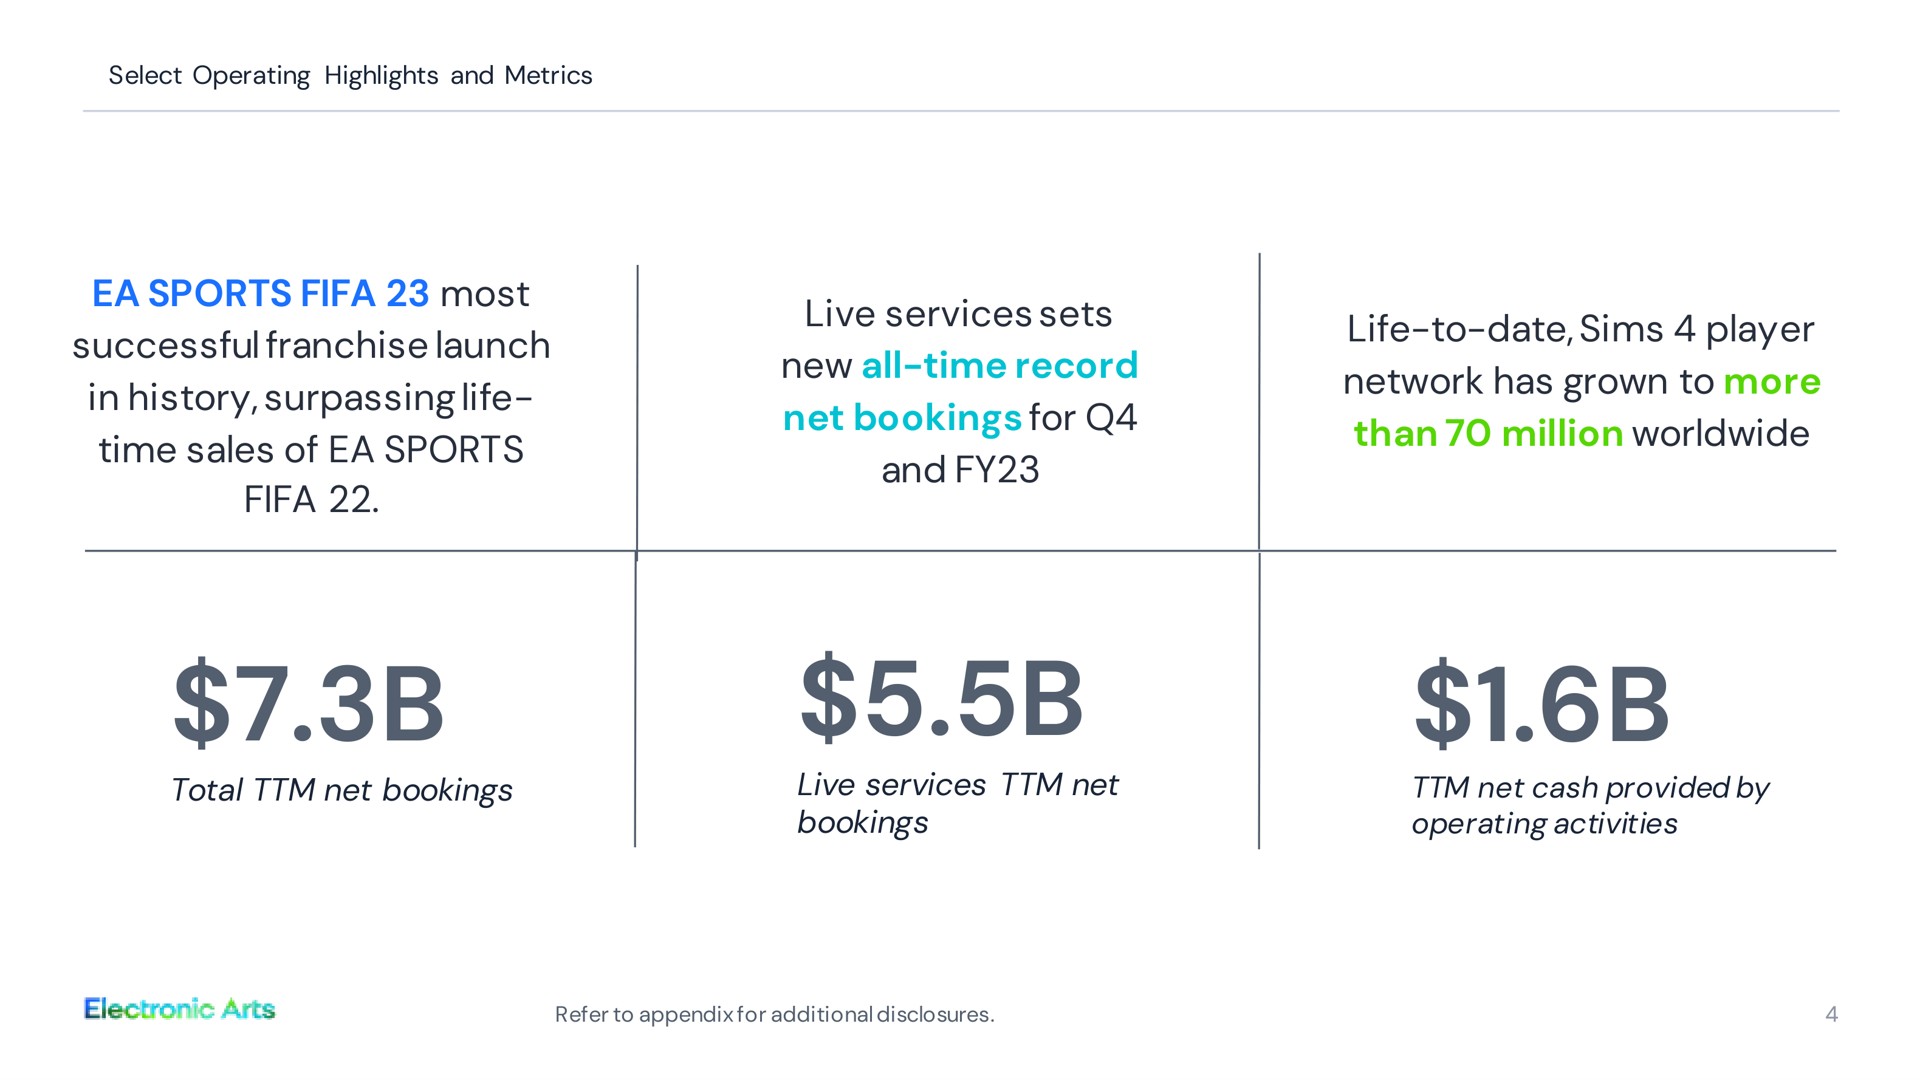 select operating highlights and metrics sports most successful franchise launch in history surpassing life time sales of sports live services sets new all time record net bookings for and life to date player network has grown to more than million total net bookings live services net bookings net cash provided by operating activities | Electronic Arts